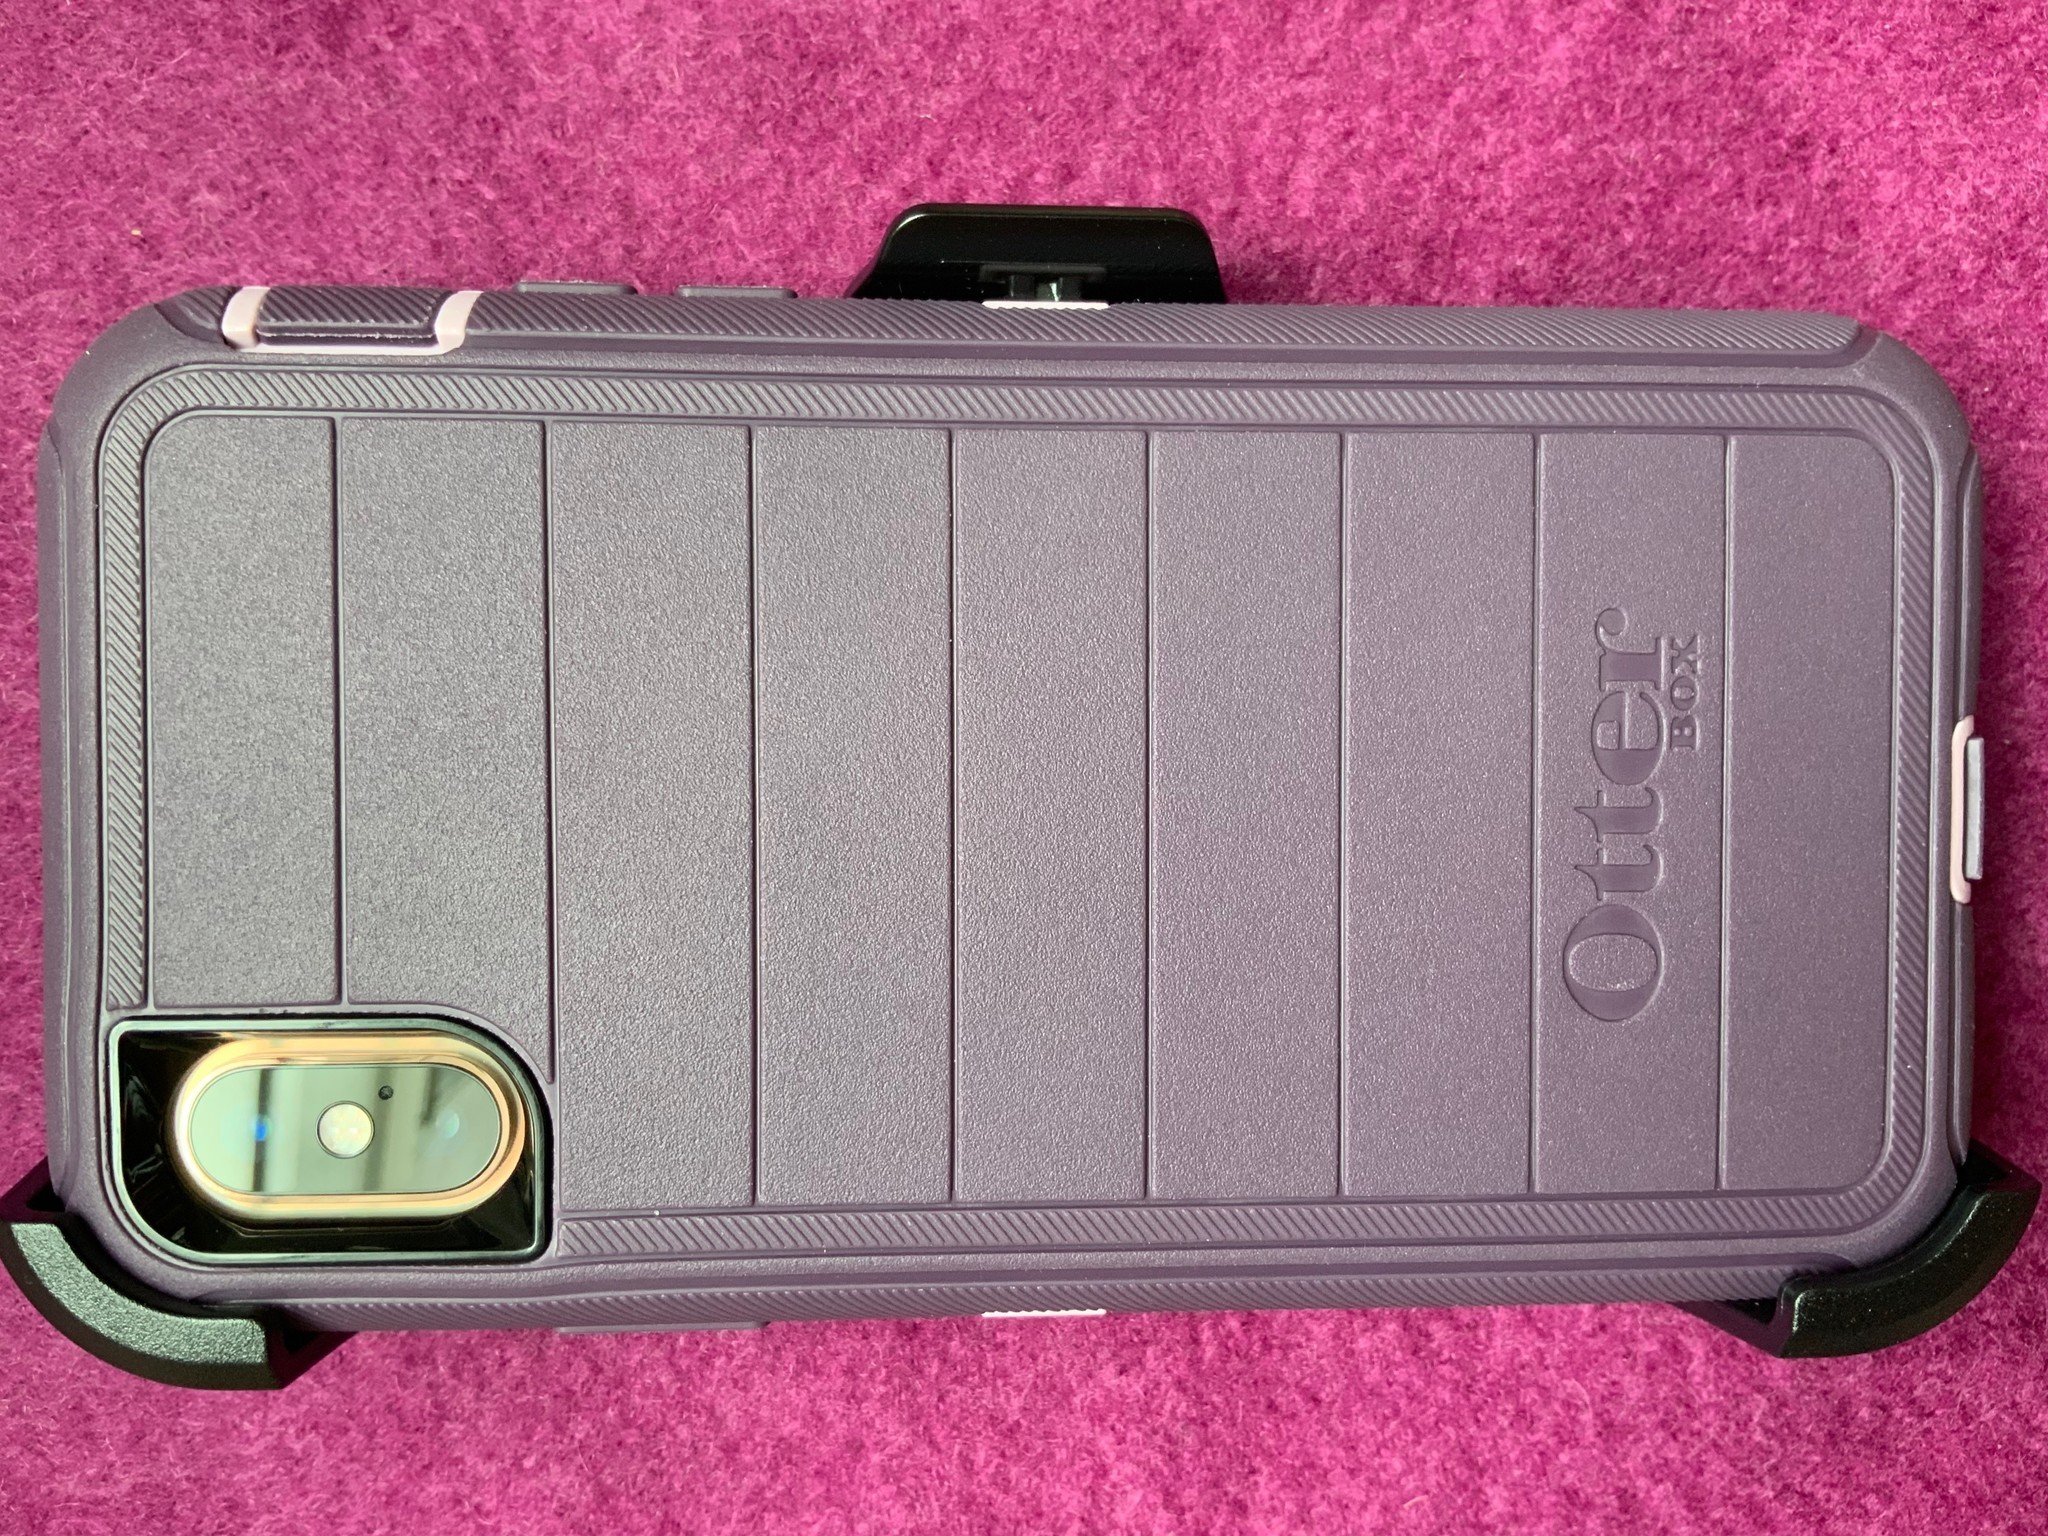 OtterBox Defender Series Pro iPhone case review: Extreme protection | iMore